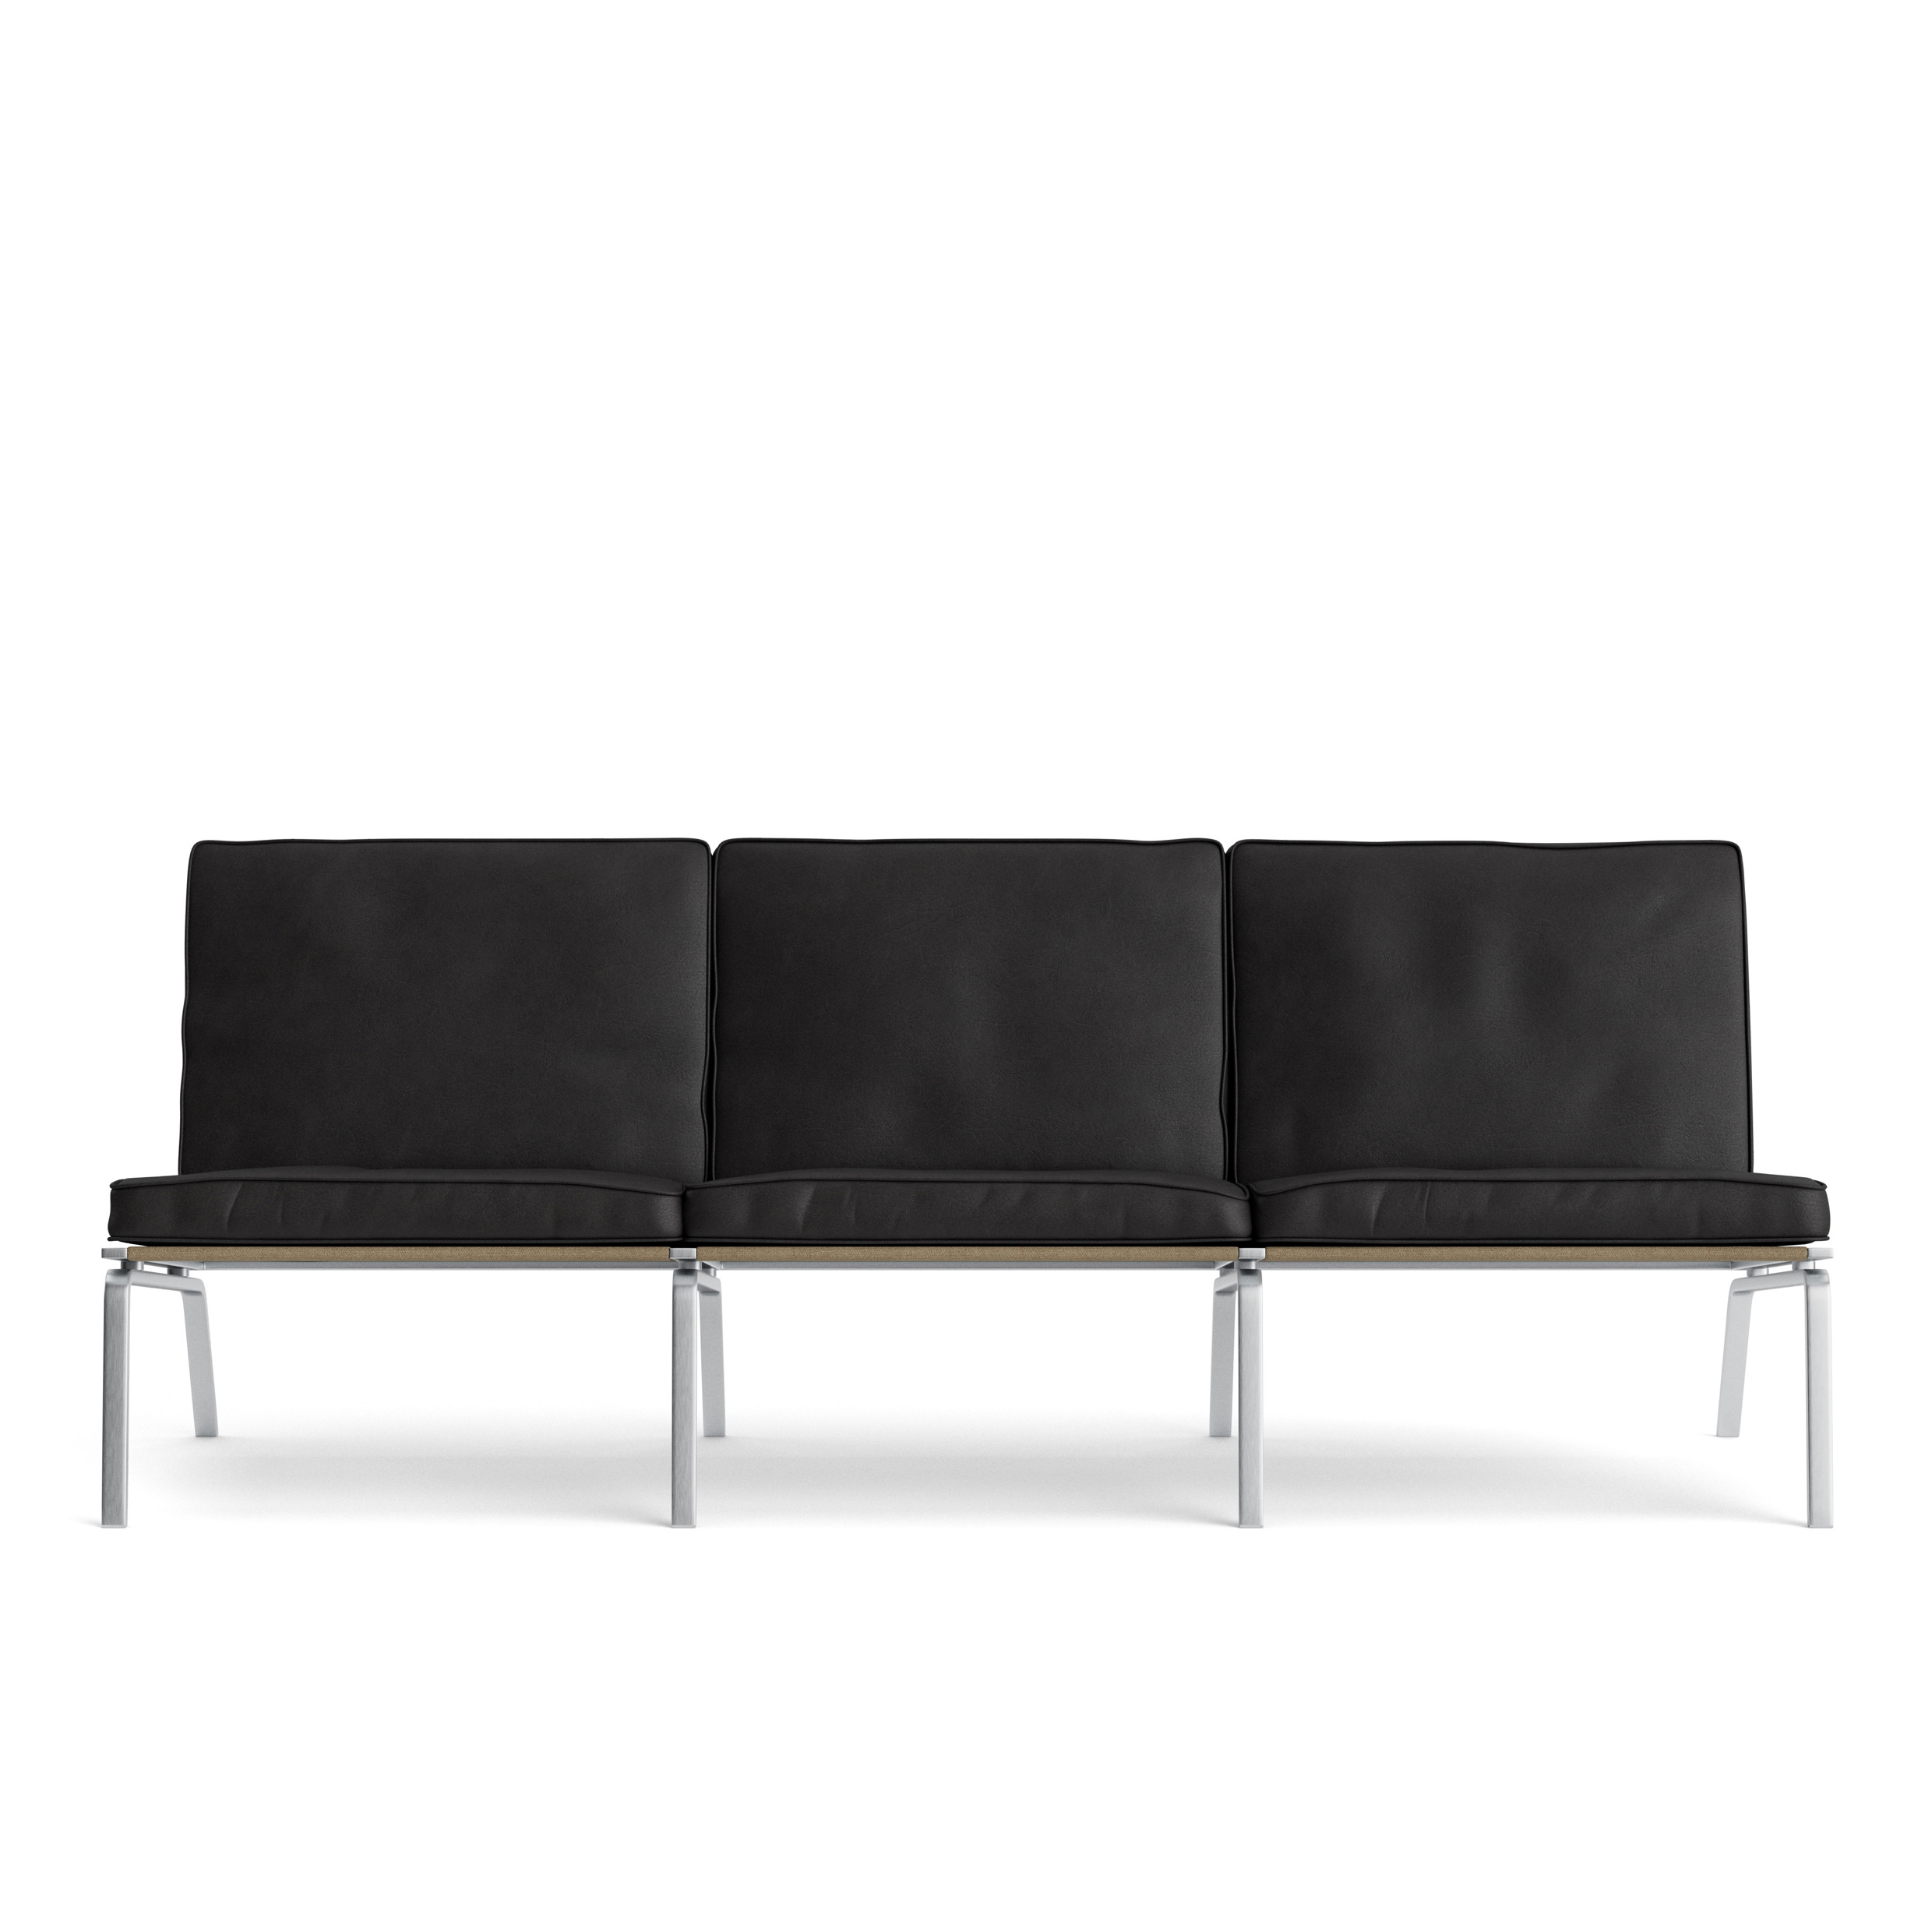 NORR11 // MAN - 3-SEATER-SOFA | STEEL | LEATHER DUNES ANTHRACITE 21003